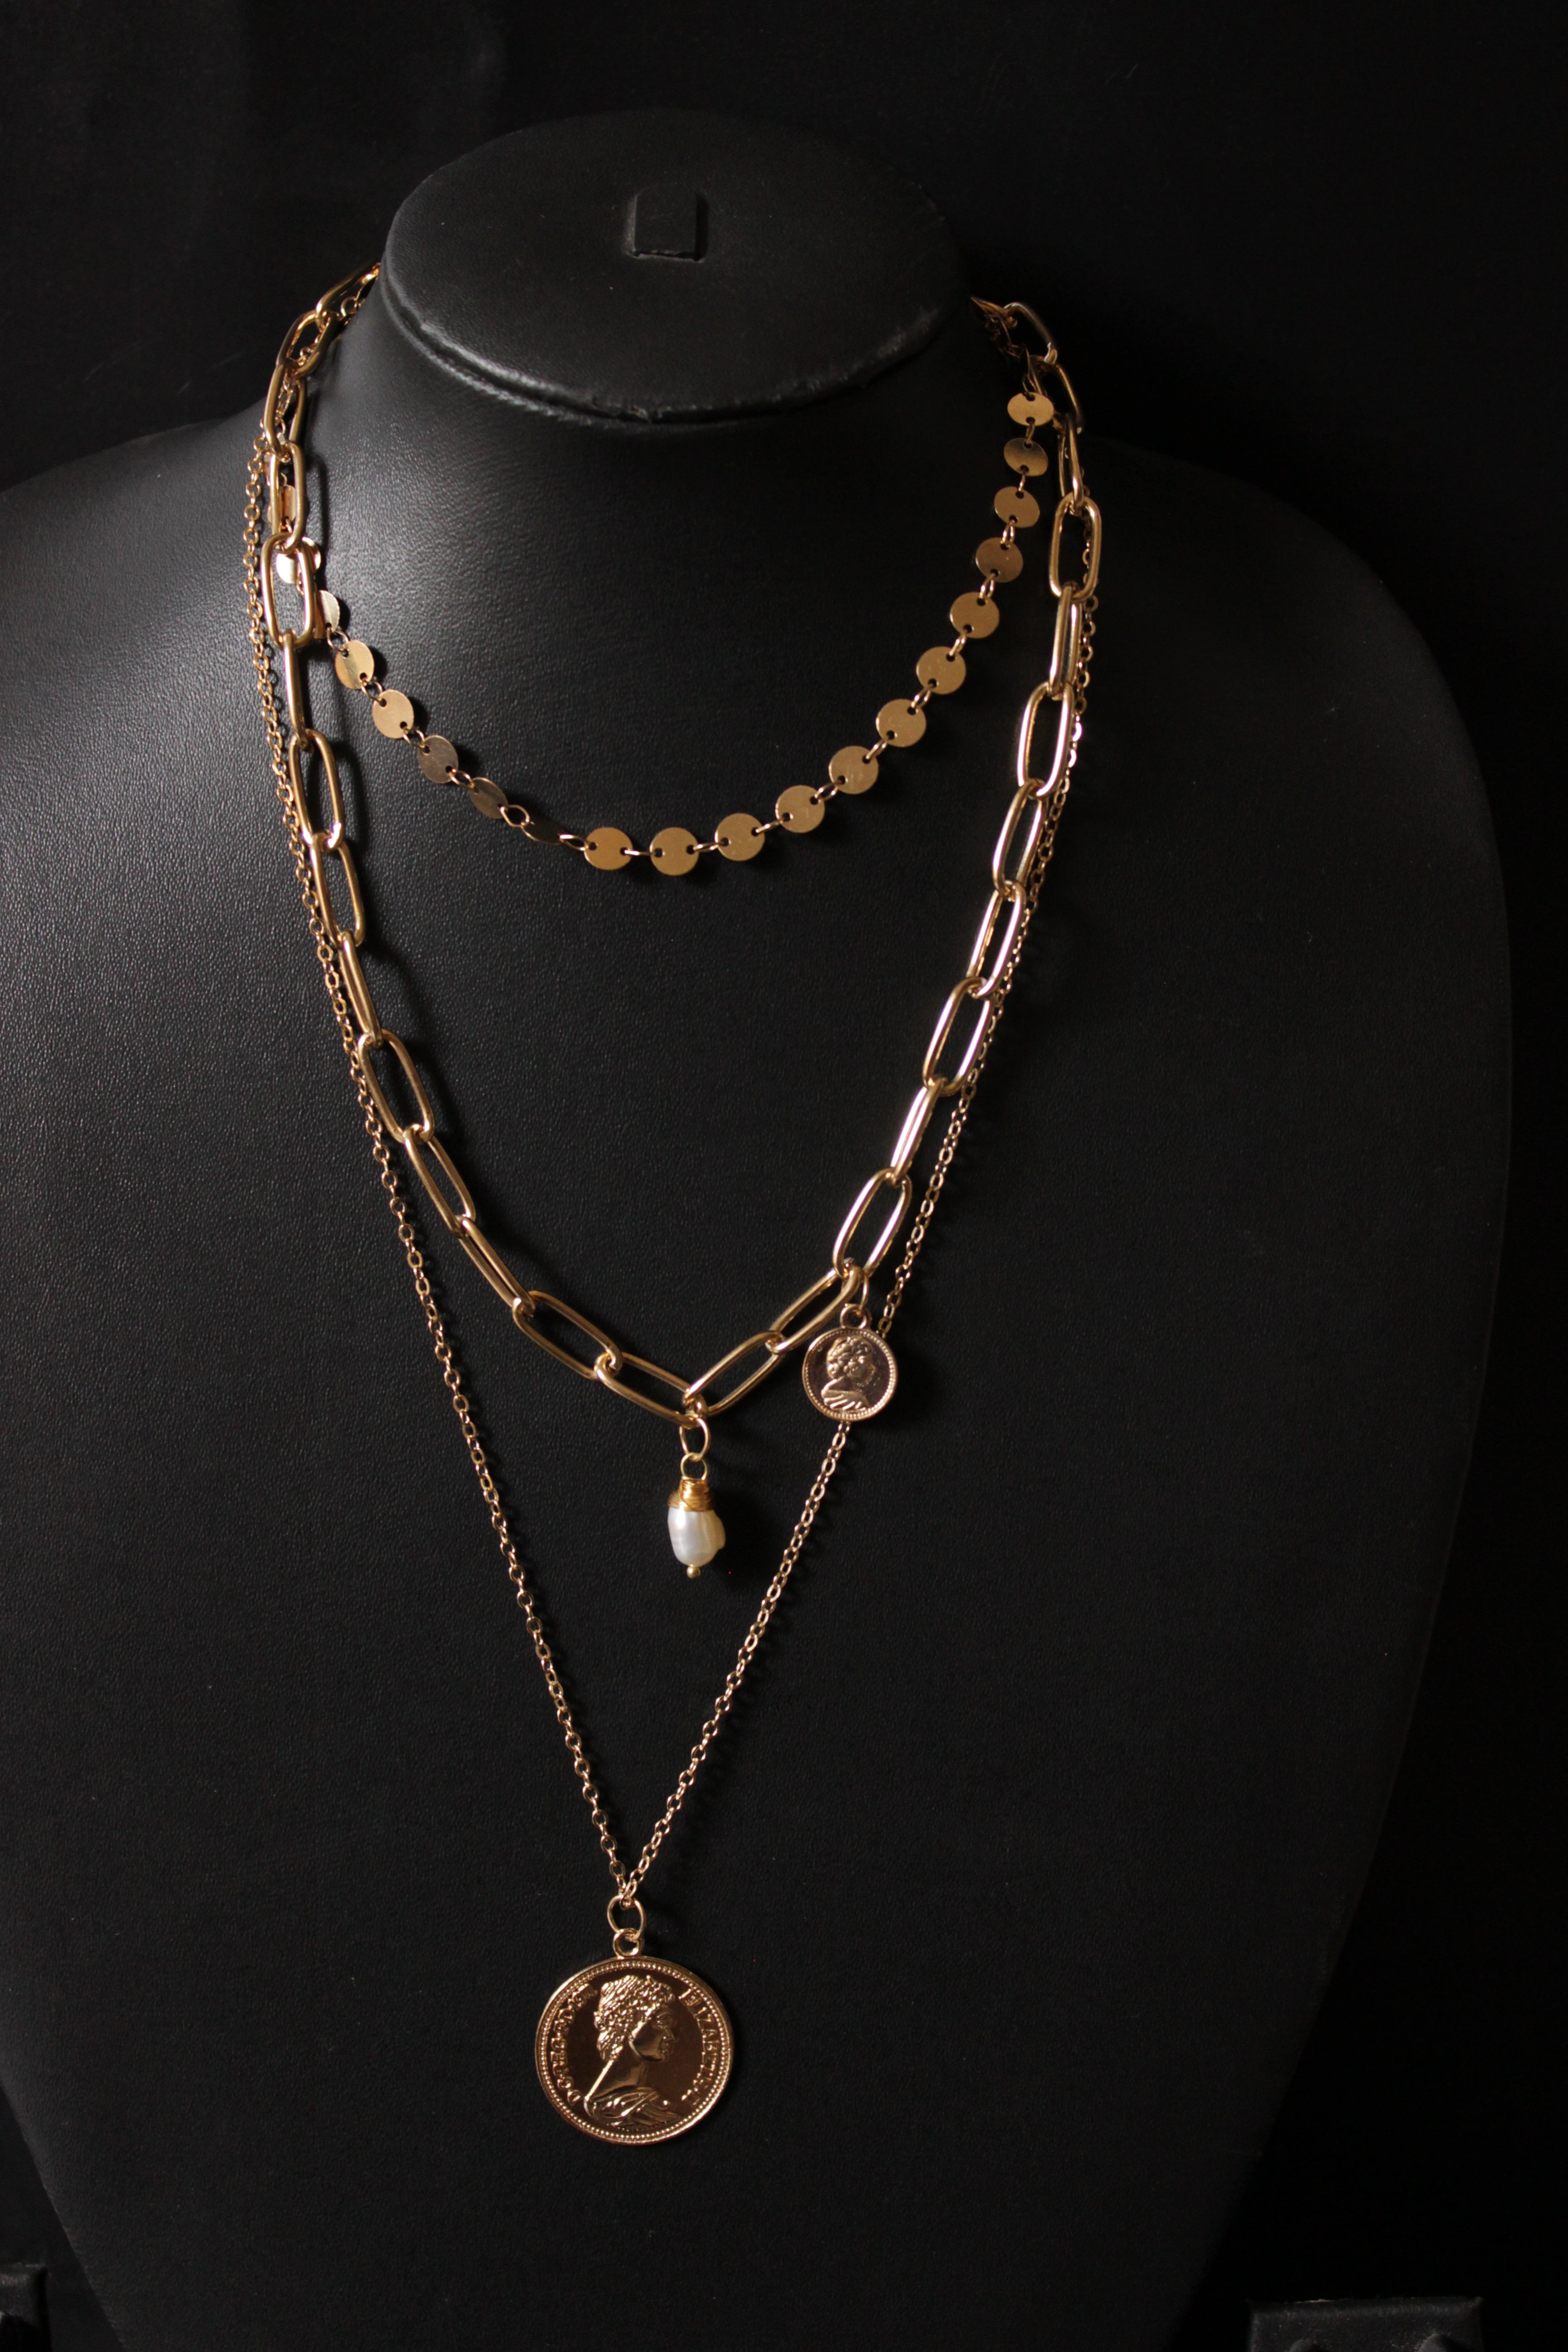 3 Layered Coin Inspired Gold Plated Chain Necklace